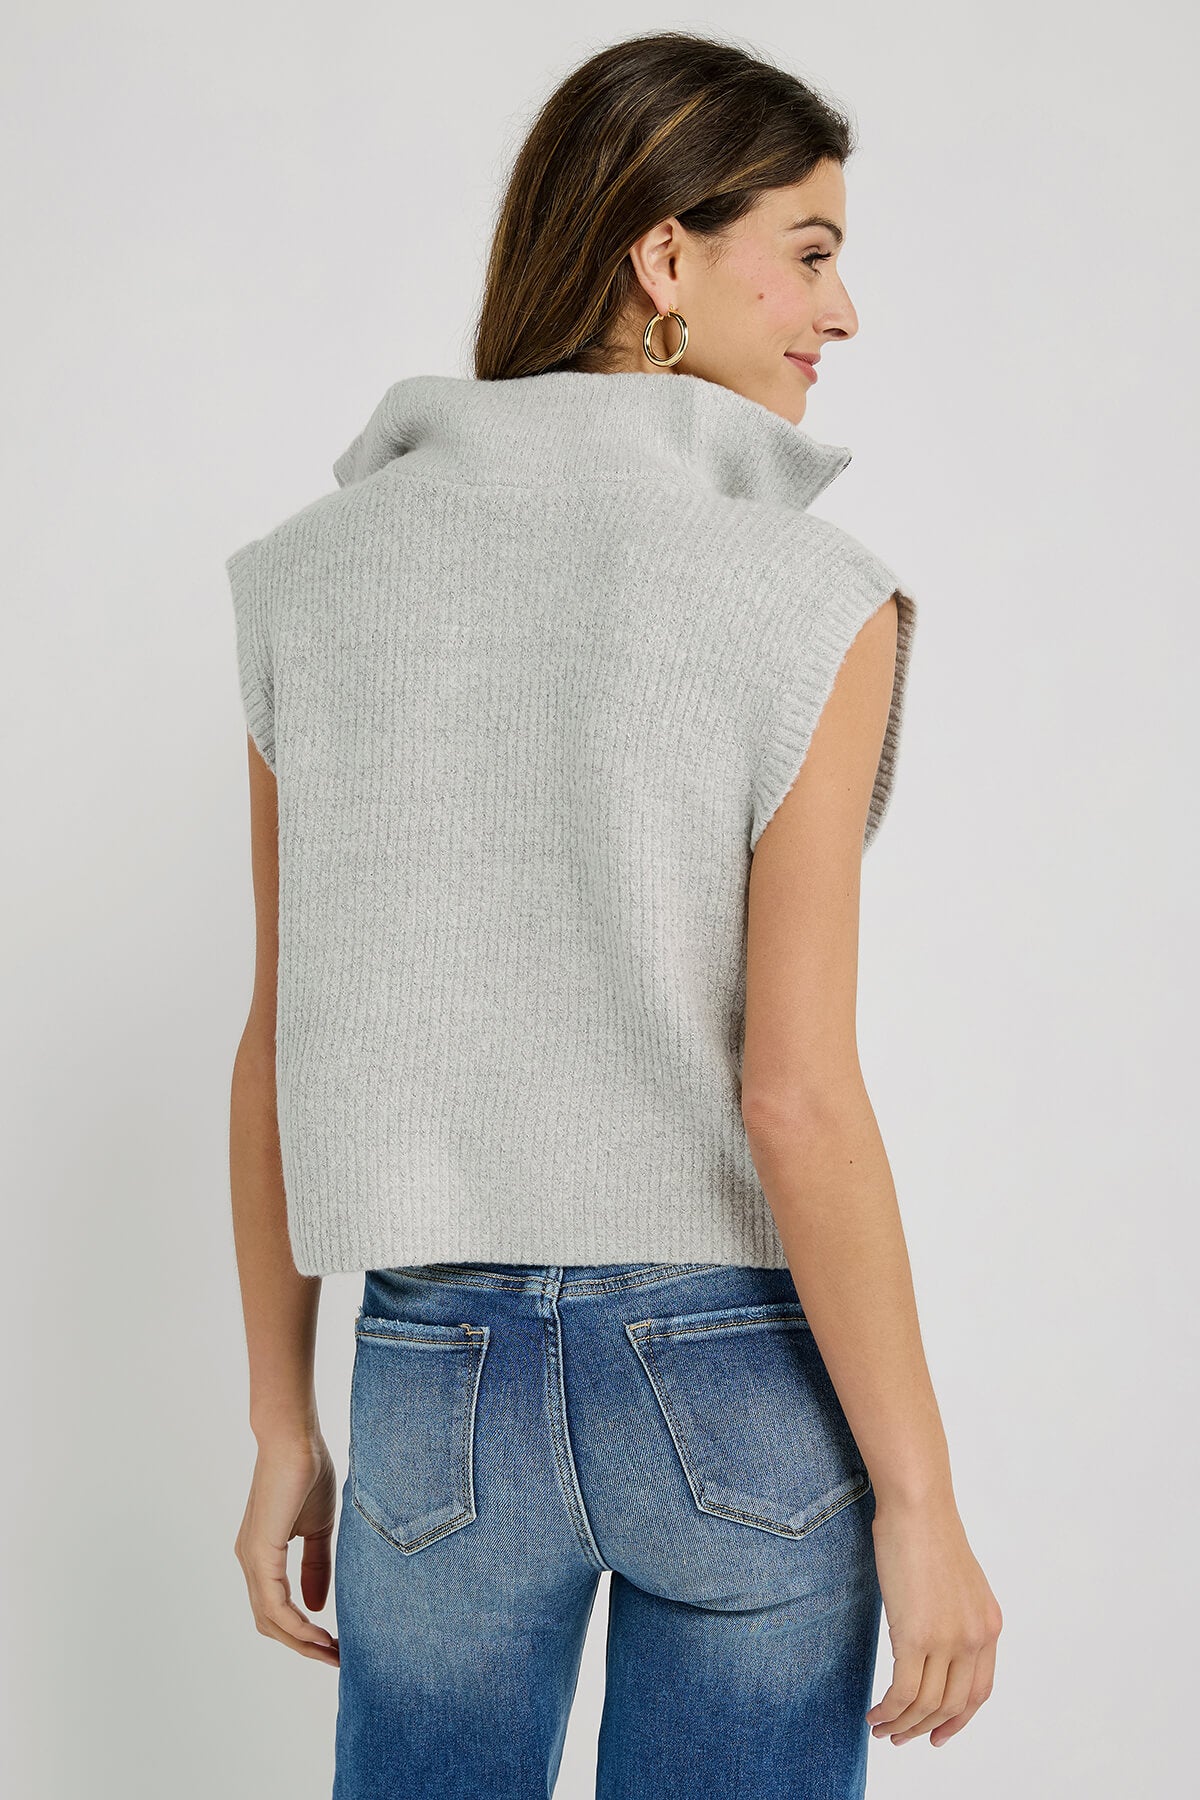 RD Style Enid Sleeveless Troyer Neck Pullover